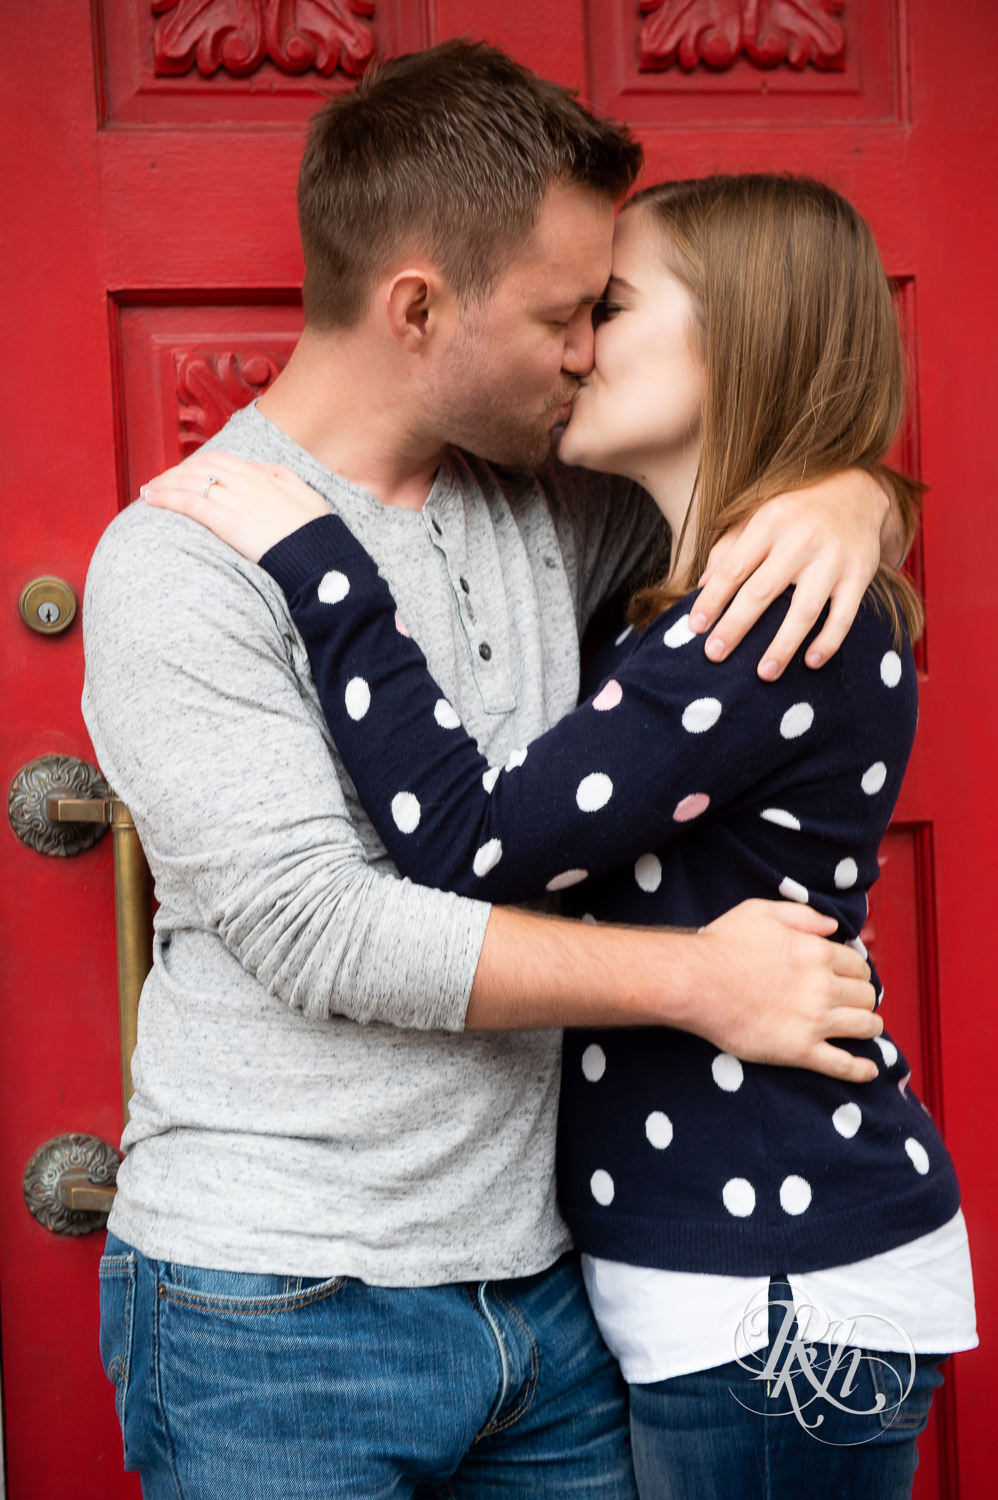 Man and woman kiss against red door on rainy day in Excelsior, Minnesota.